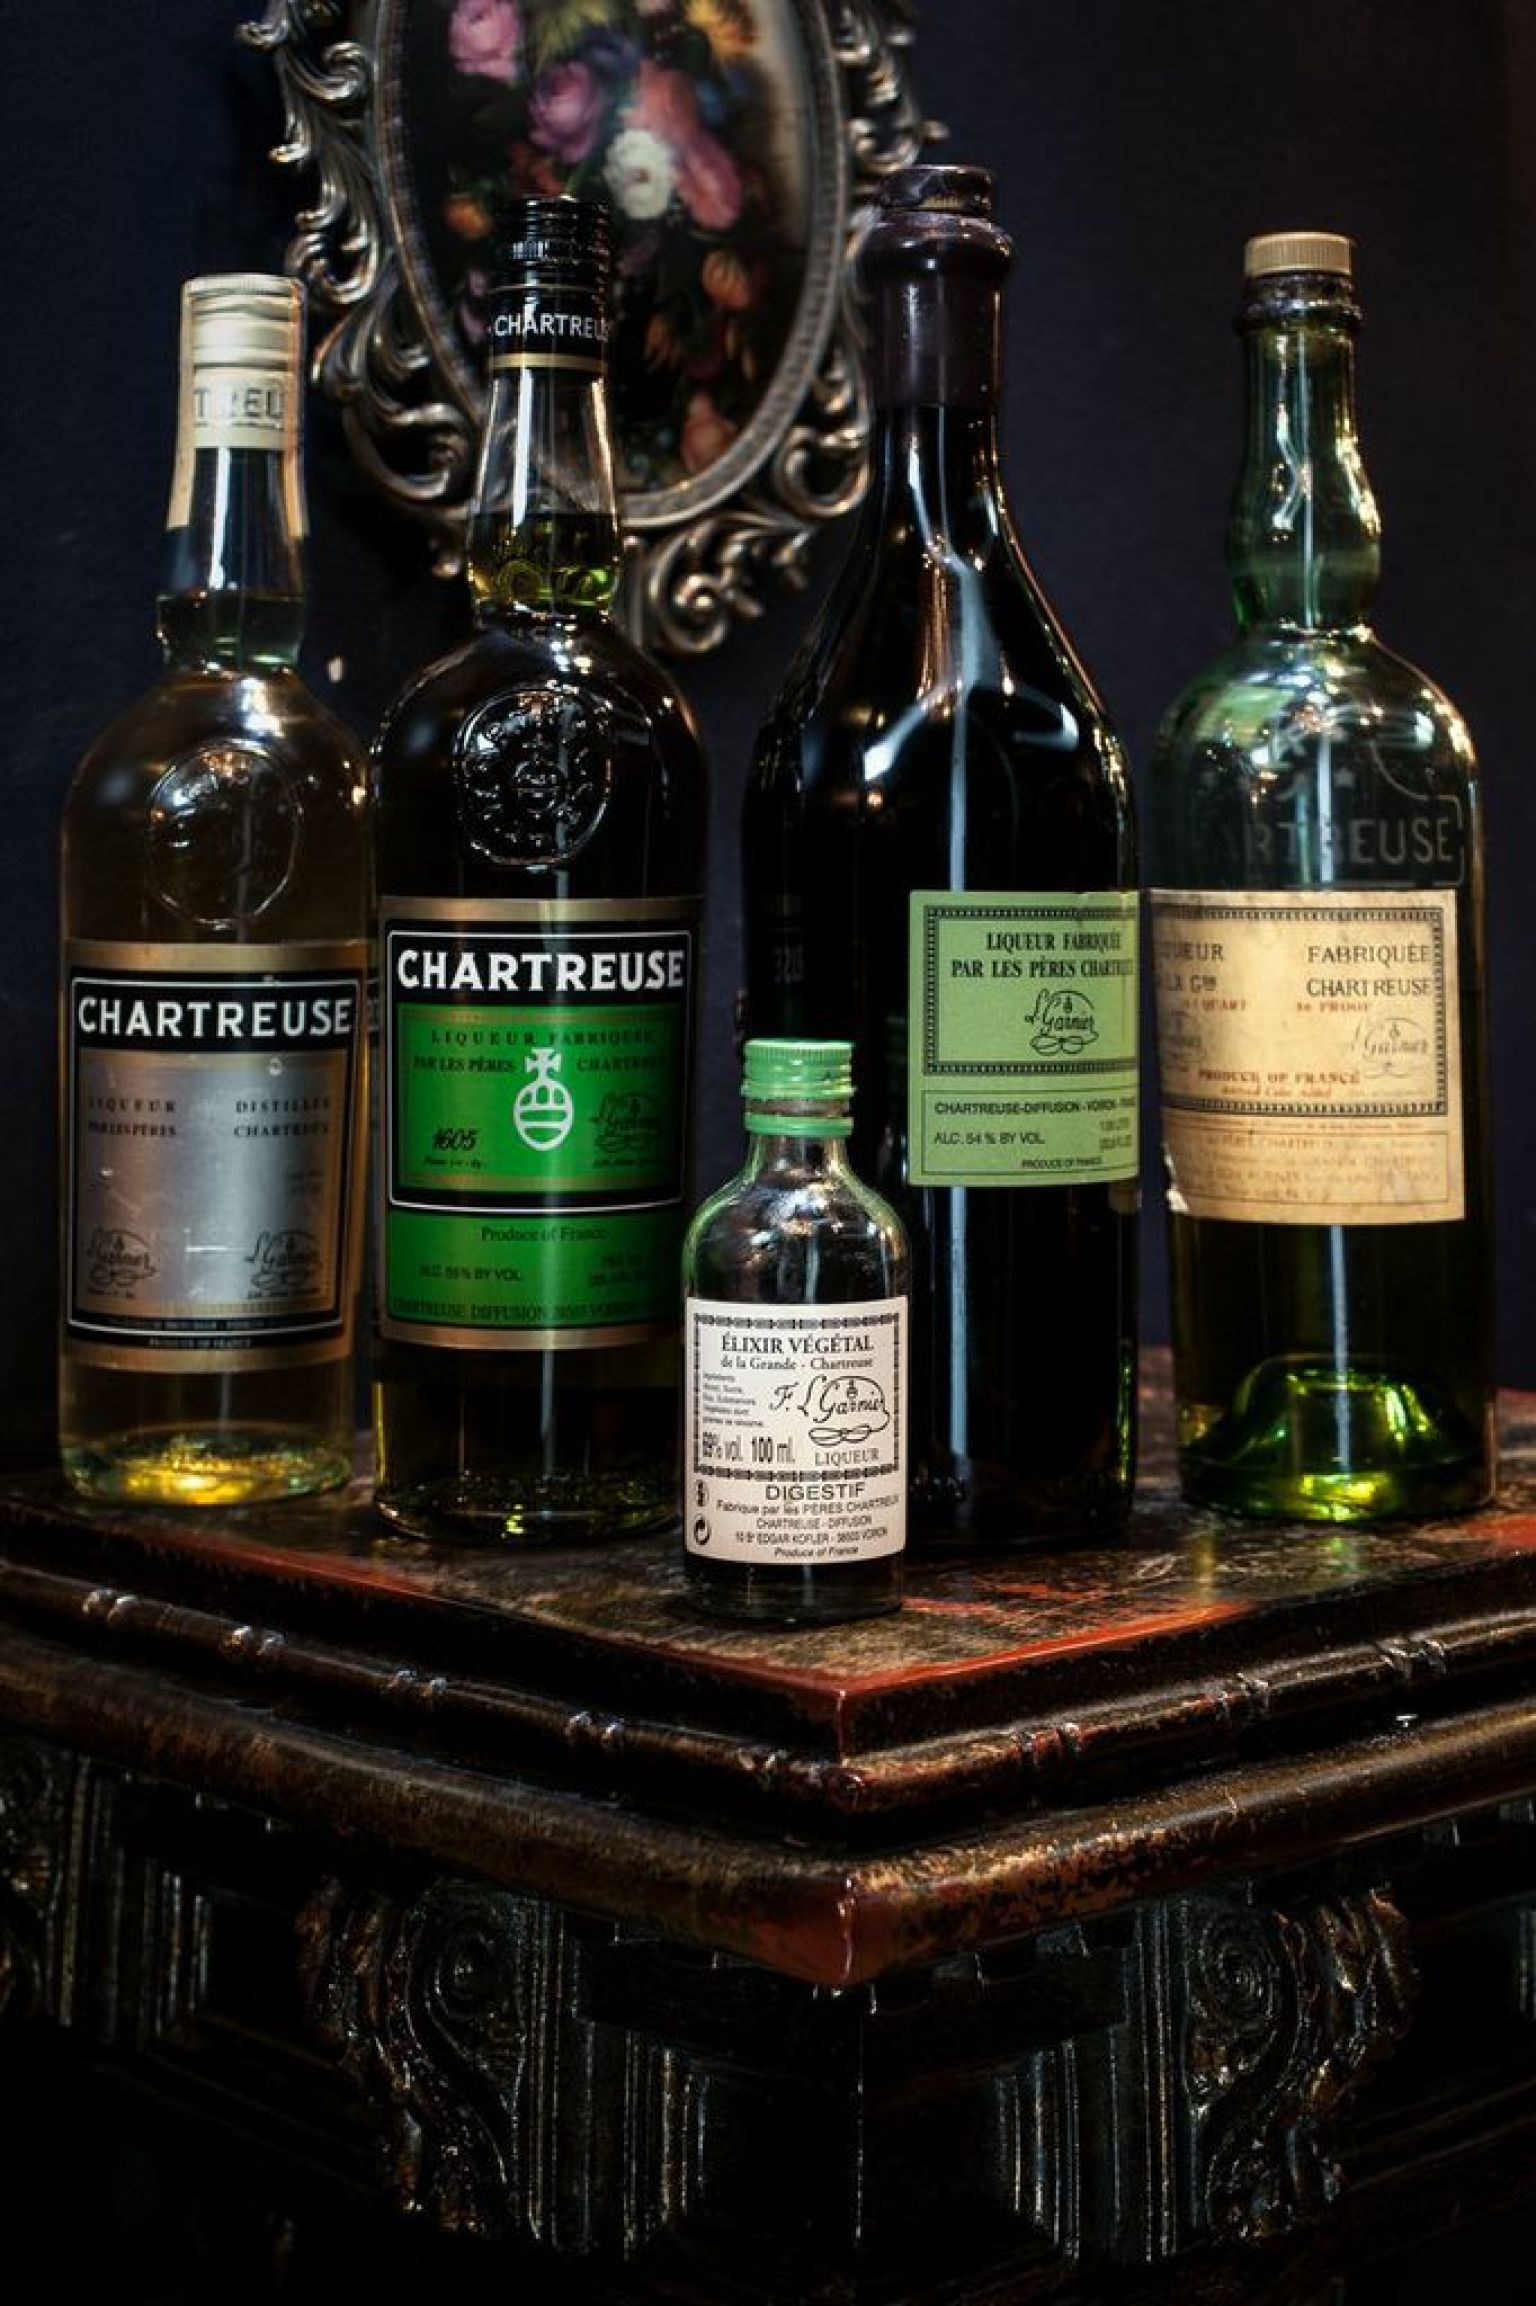 Vintage Liquors Give A Taste Of Decades-Old Spirits (PHOTOS) | HuffPost